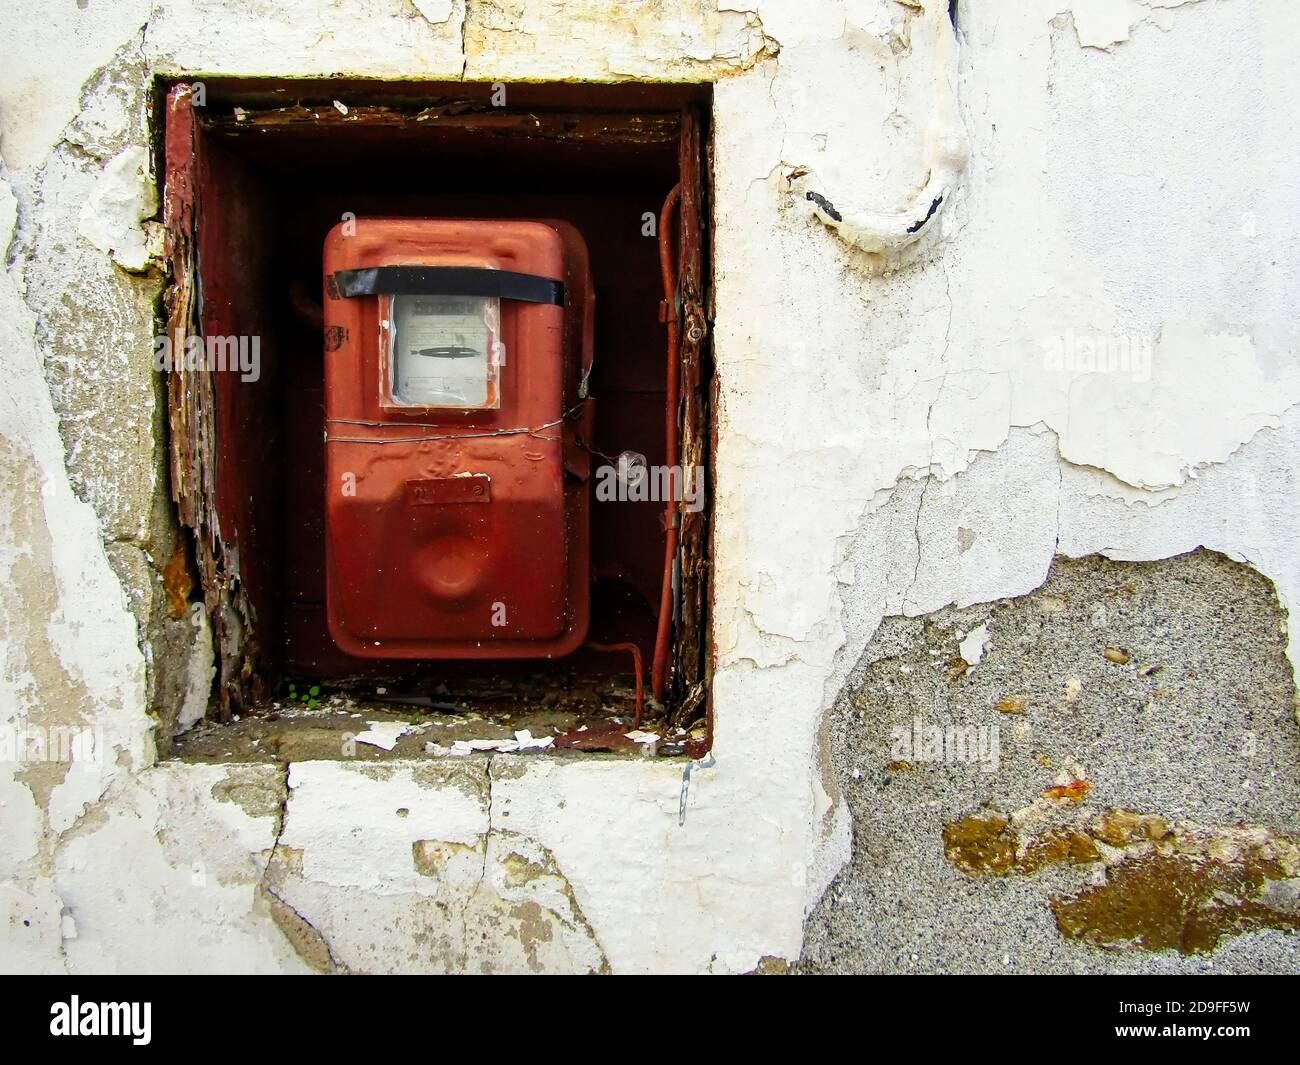 Old Electricity Meter on Deserted House Wall, Galatas Village, Crete, Greece Stock Photo